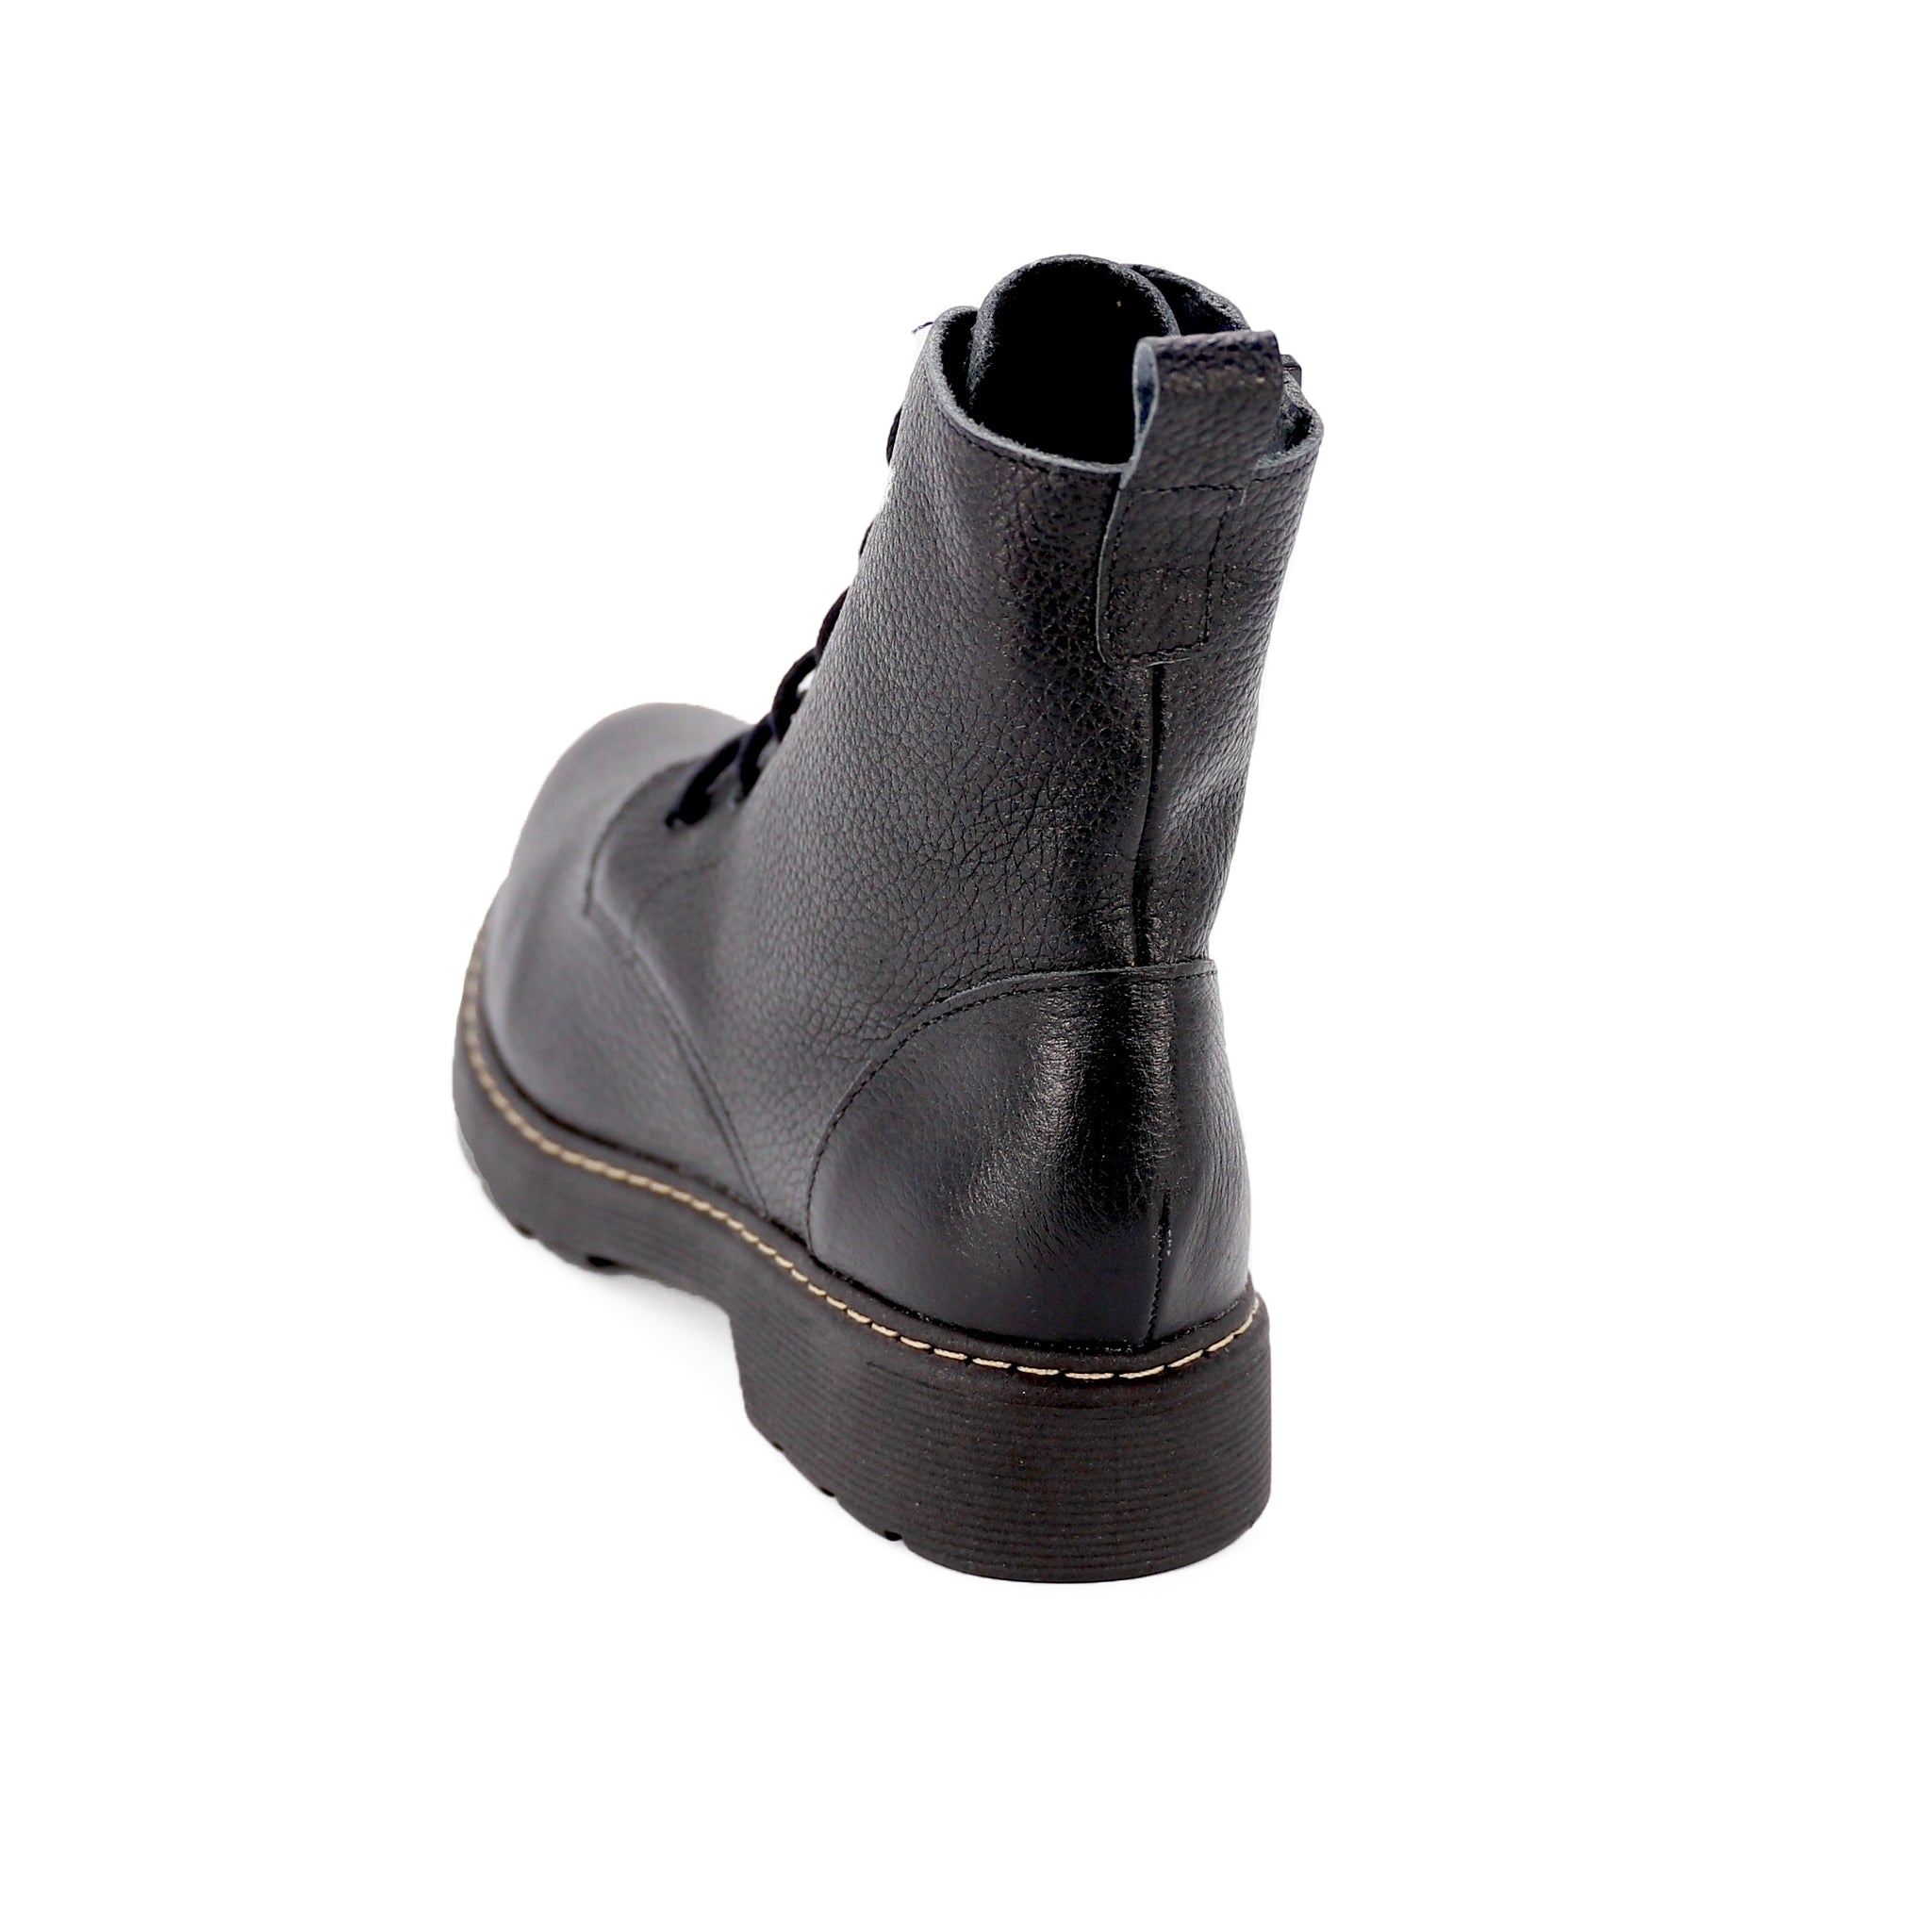 womens navy leather booties